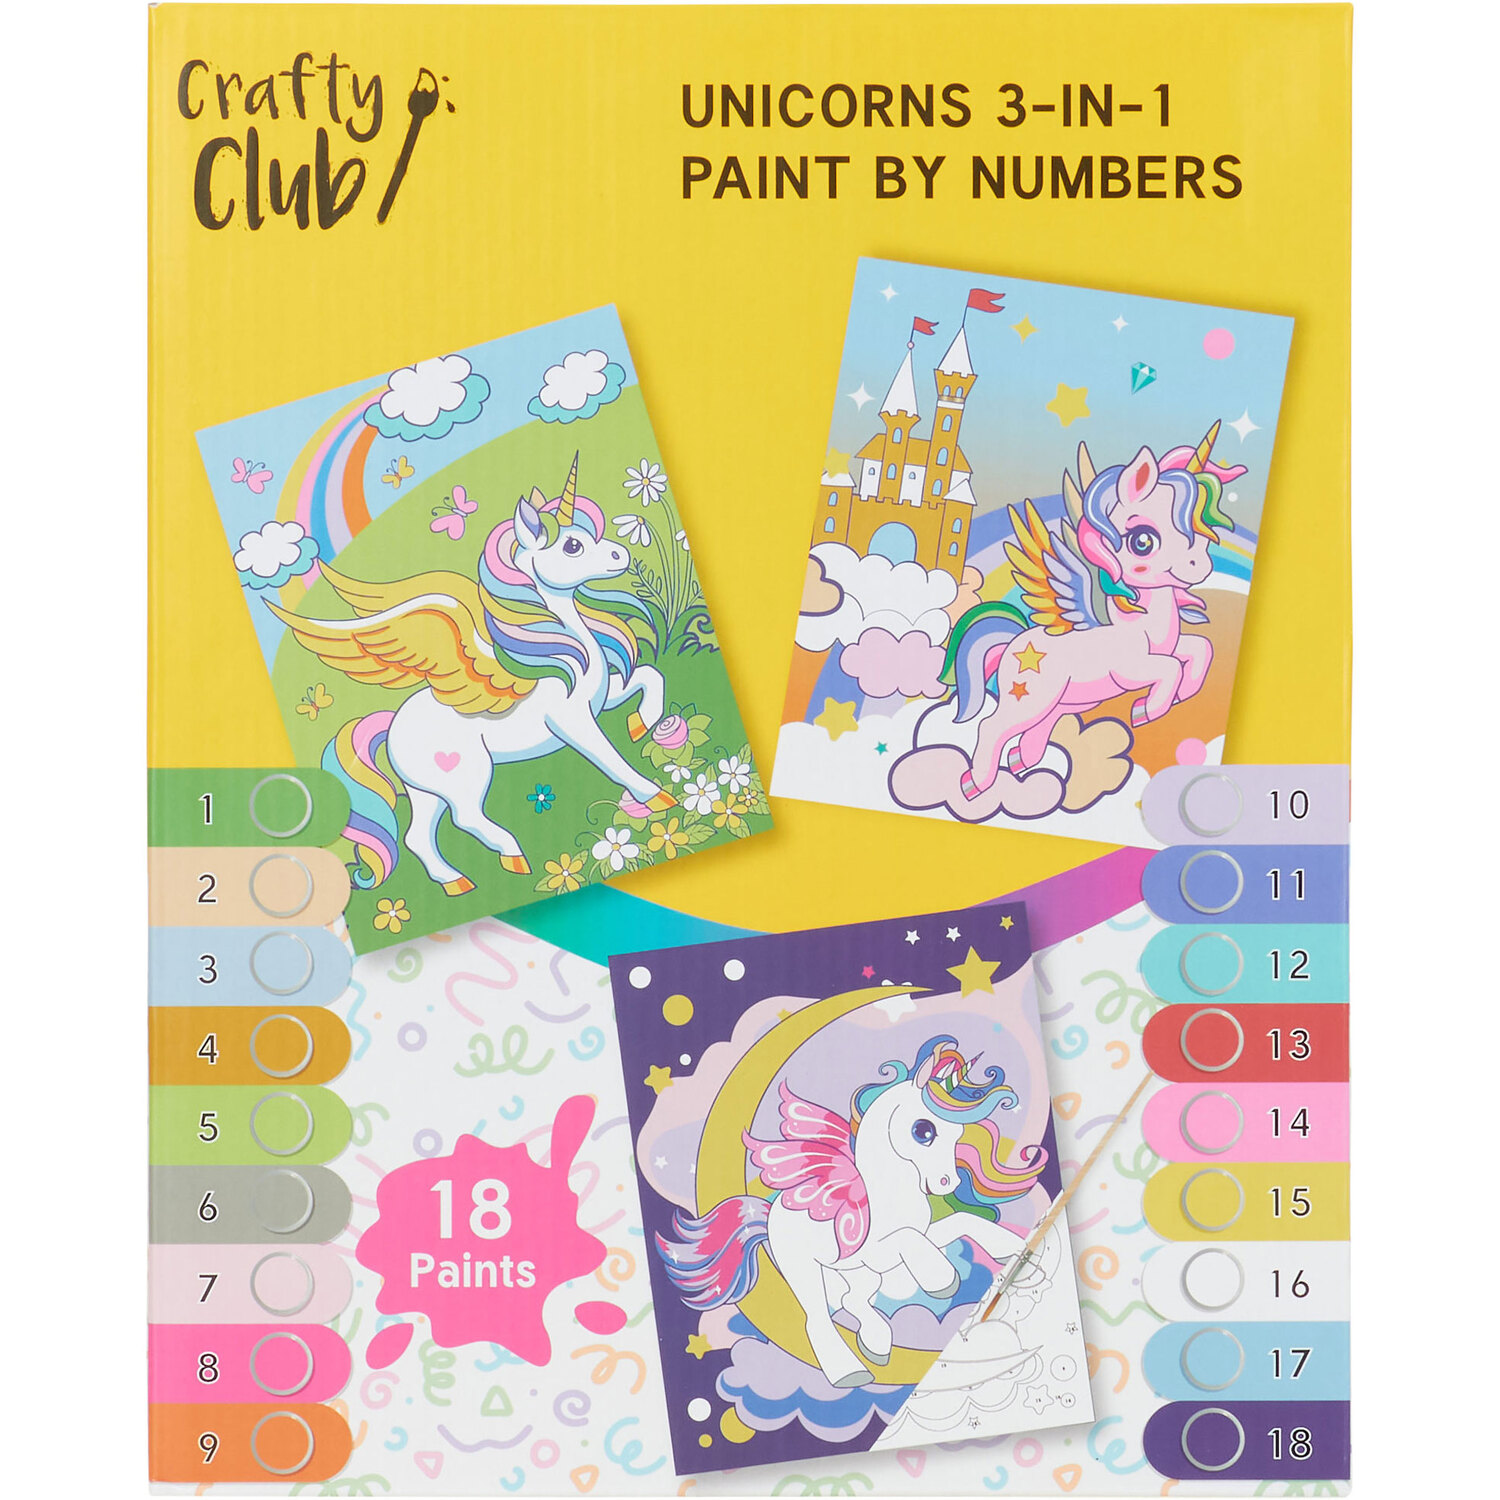 Crafty Club Unicorns 3 in 1 Paint by Numbers Kit Image 1